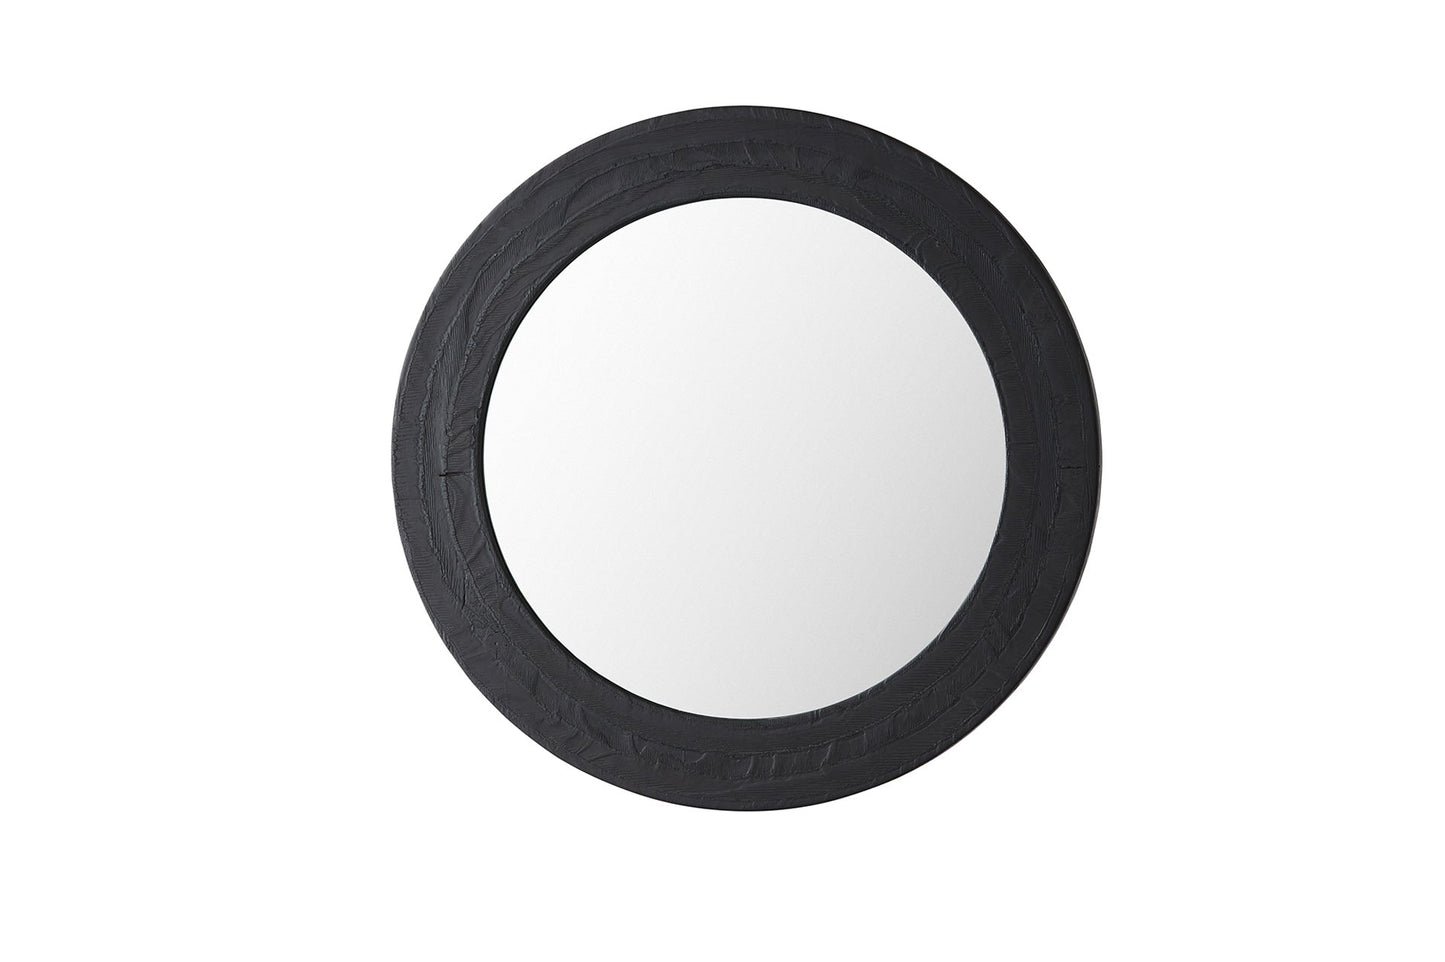 Scorched Circular Ply Mirror Large